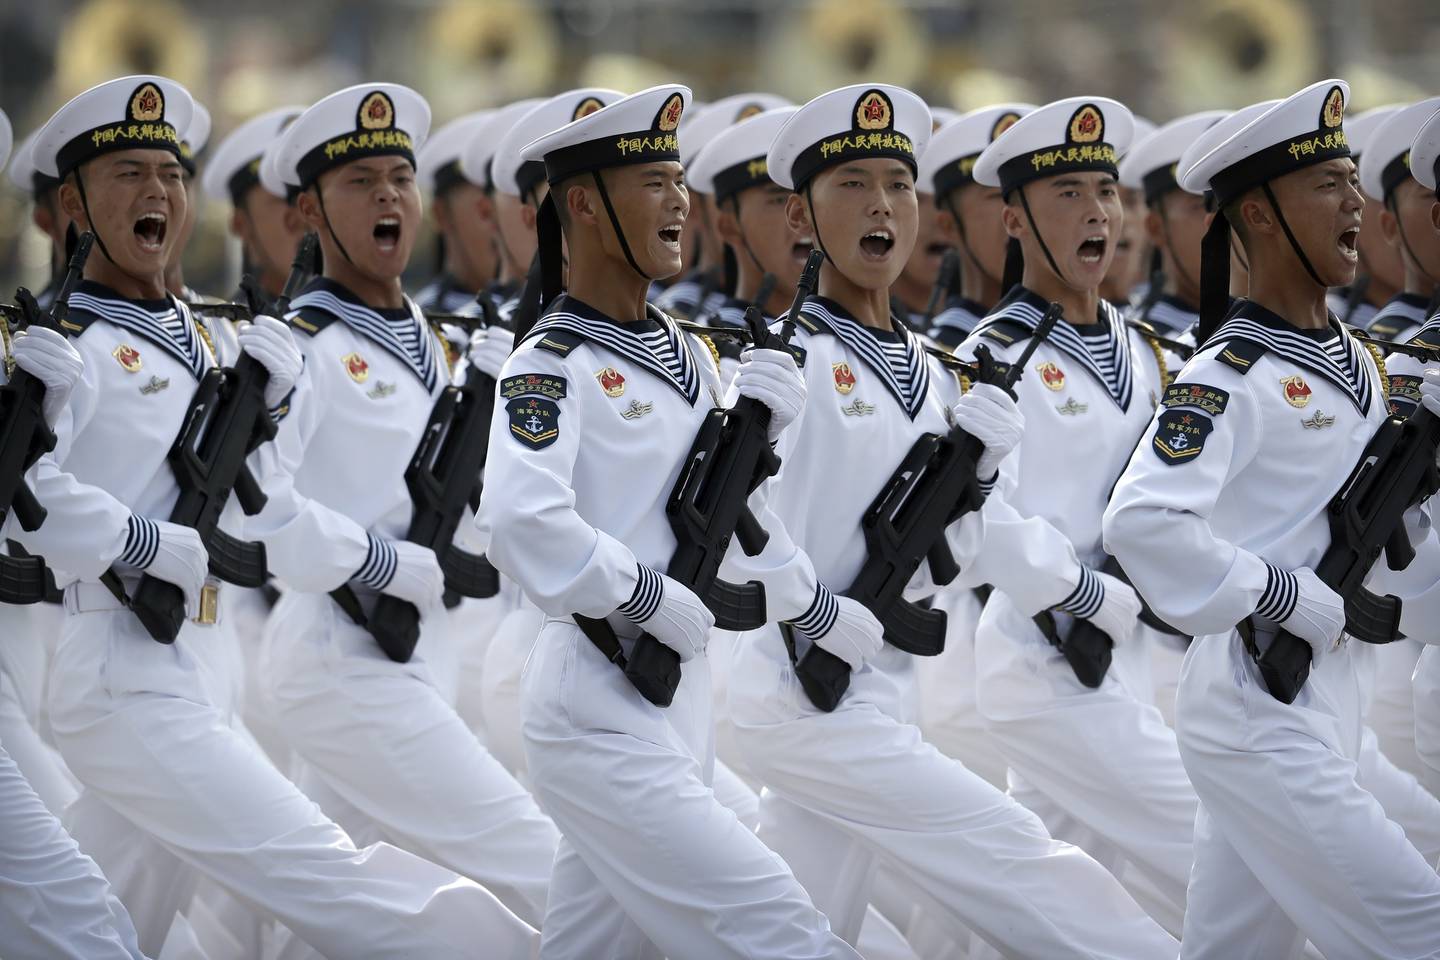 Soldiers from PLA Navy march during a parade to commemorate the 70th anniversary of the founding of Communist China in Beijing in October 2019. AP Photo